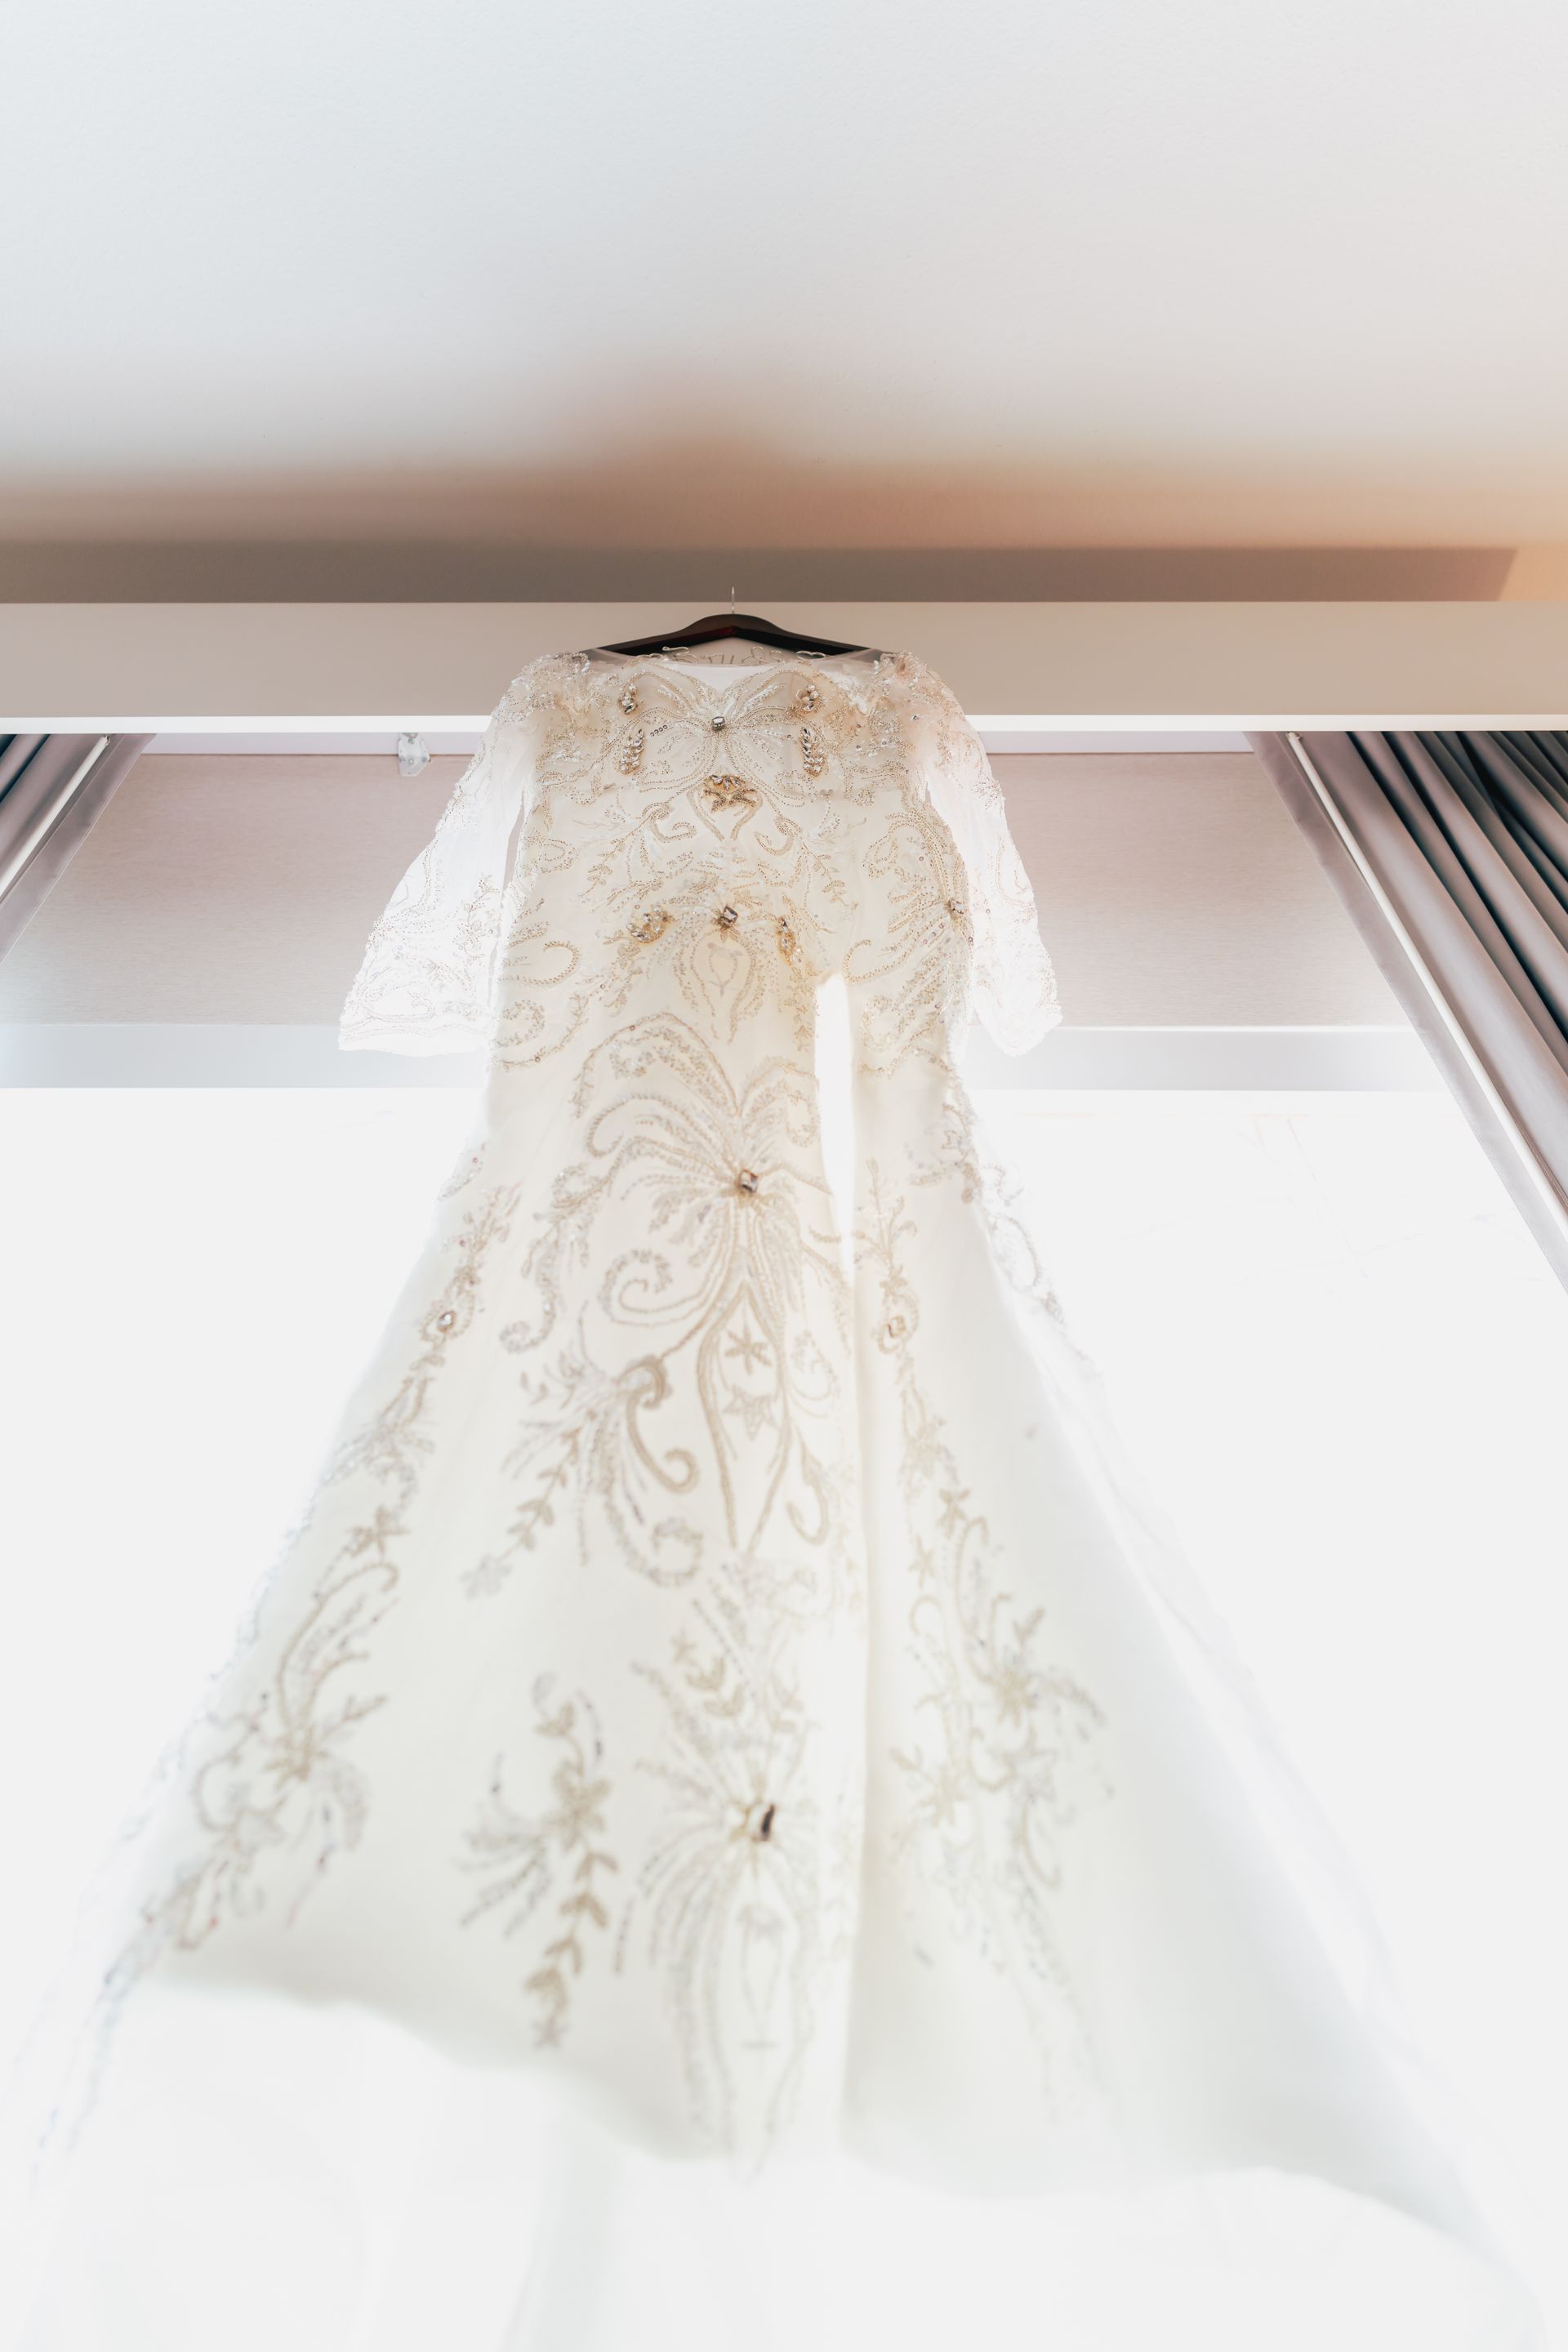 A wedding dress is hanging from the ceiling in a room.